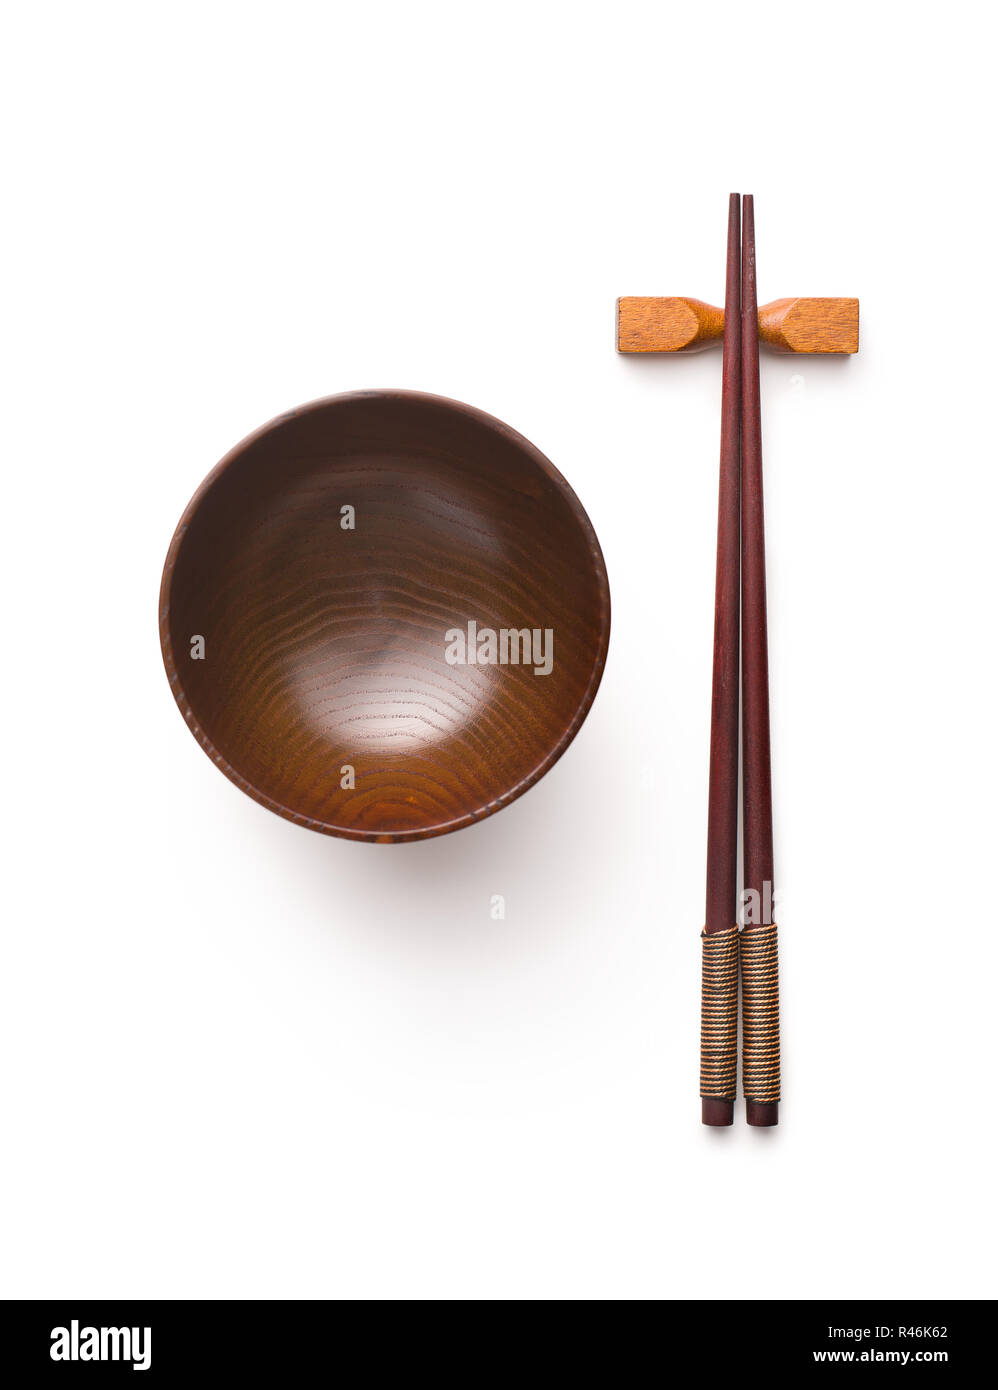 Wooden bowl and chopsticks isolated on white background. Stock Photo